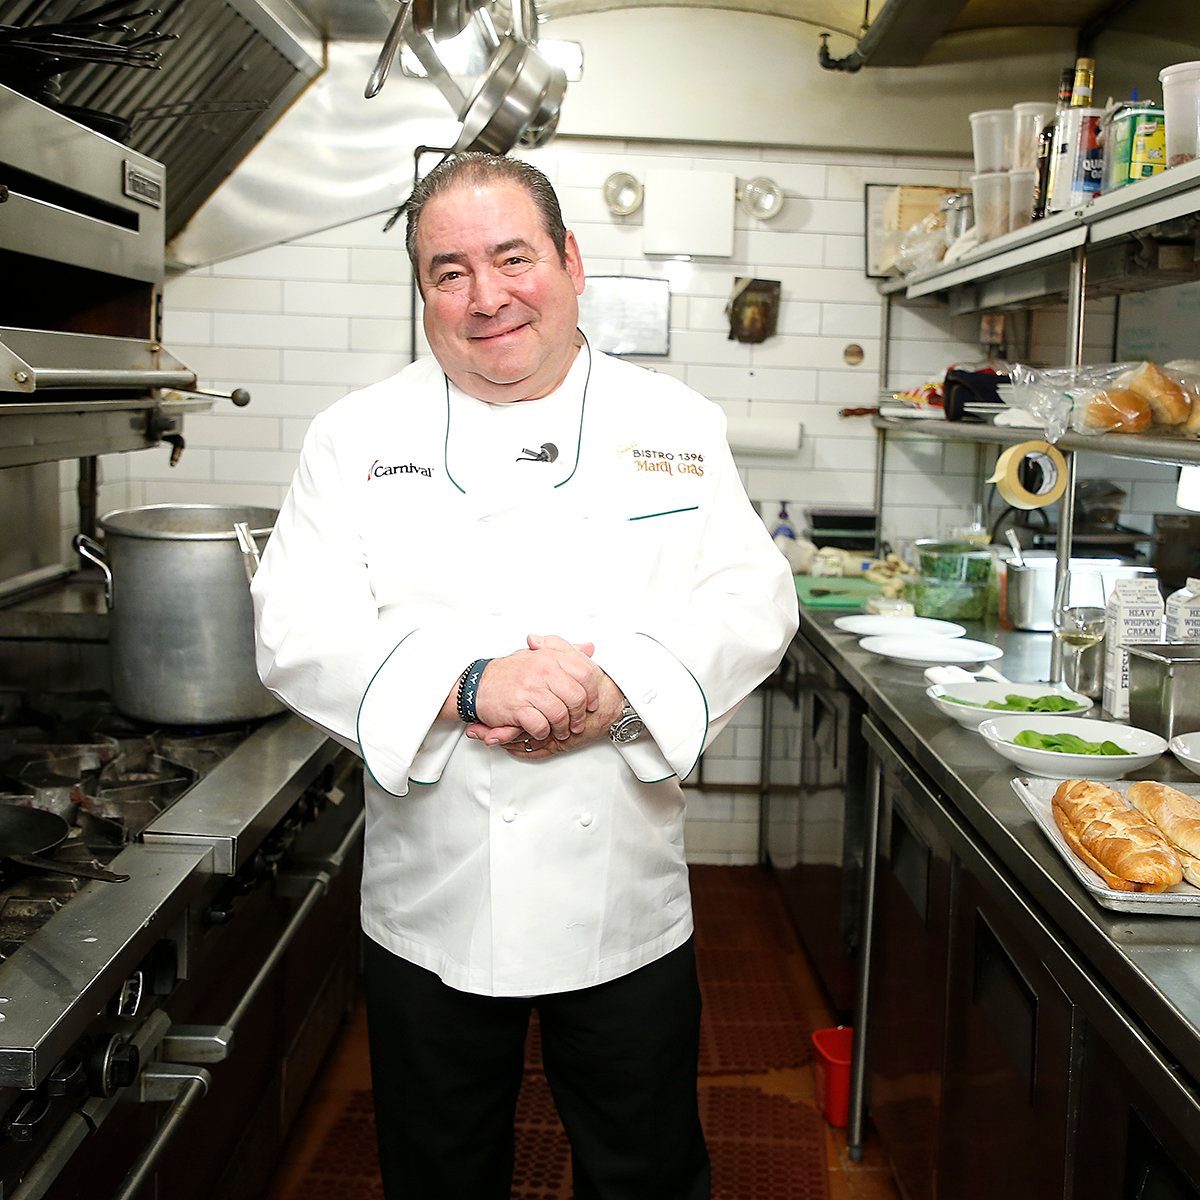 NEW YORK, NEW YORK - MARCH 06: Chef Emeril Lagasse announces new restaurant aboard Carnival Cruise Line's Mardi Gras Ship on March 06, 2019 in New York City. (Photo by John Lamparski/Getty Images)